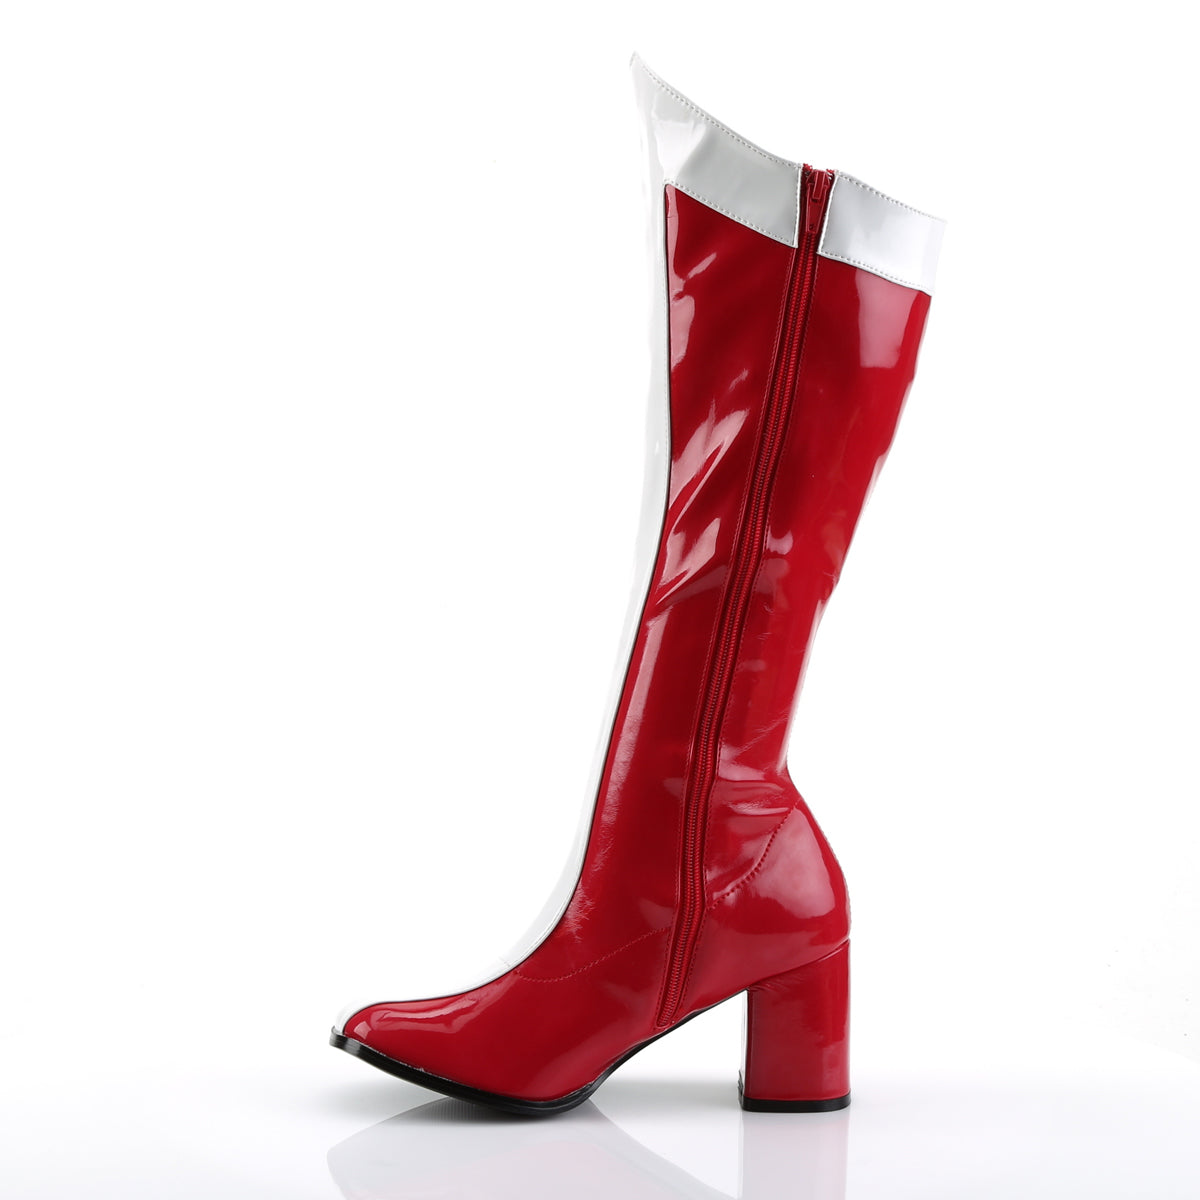 GOGO-305 Funtasma Fantasy Red-White Stretch Patent Women's Boots [Fancy Dress Costume Shoes]